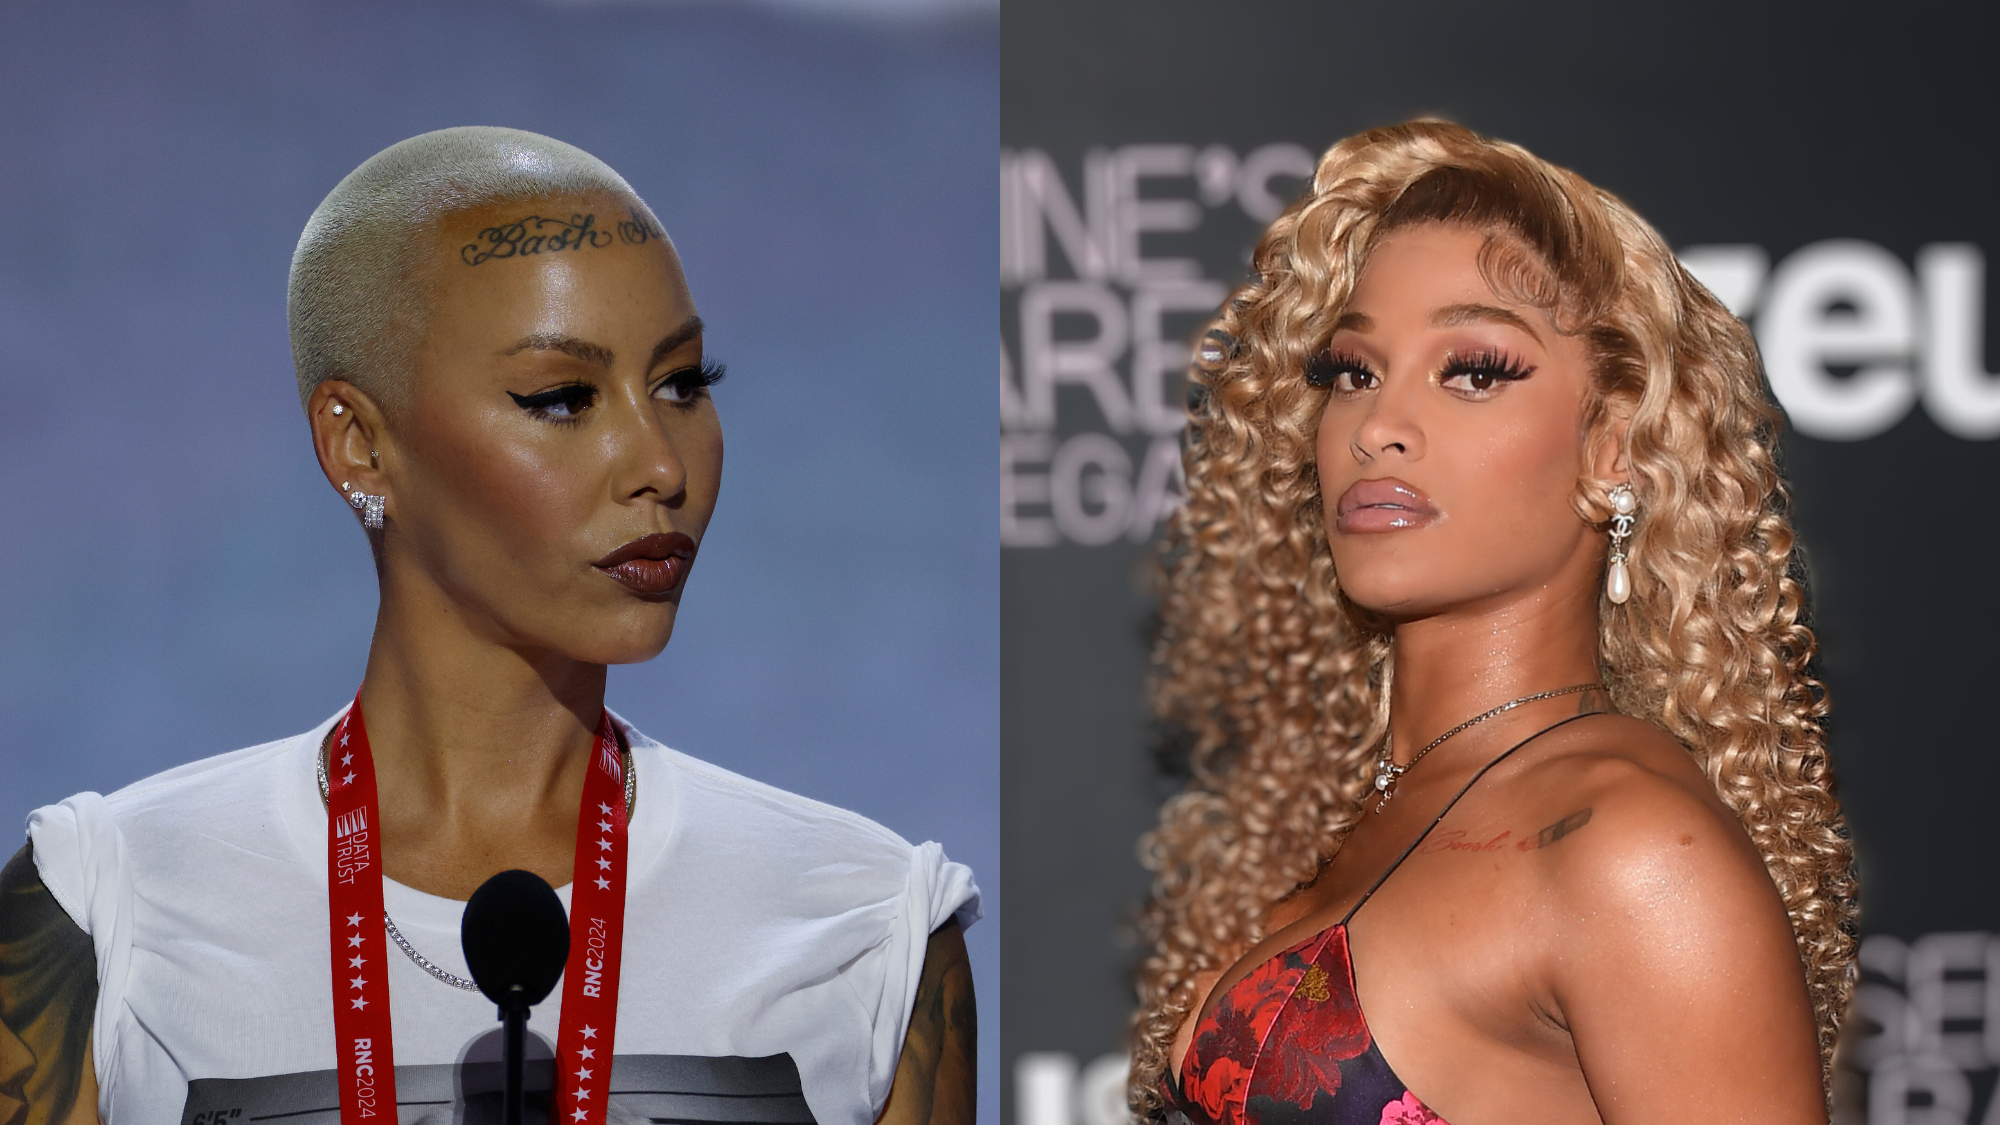 Amber Rose And Joseline Hernandez’s Scrapped ‘College Hill’ Fight Scene Surfaces